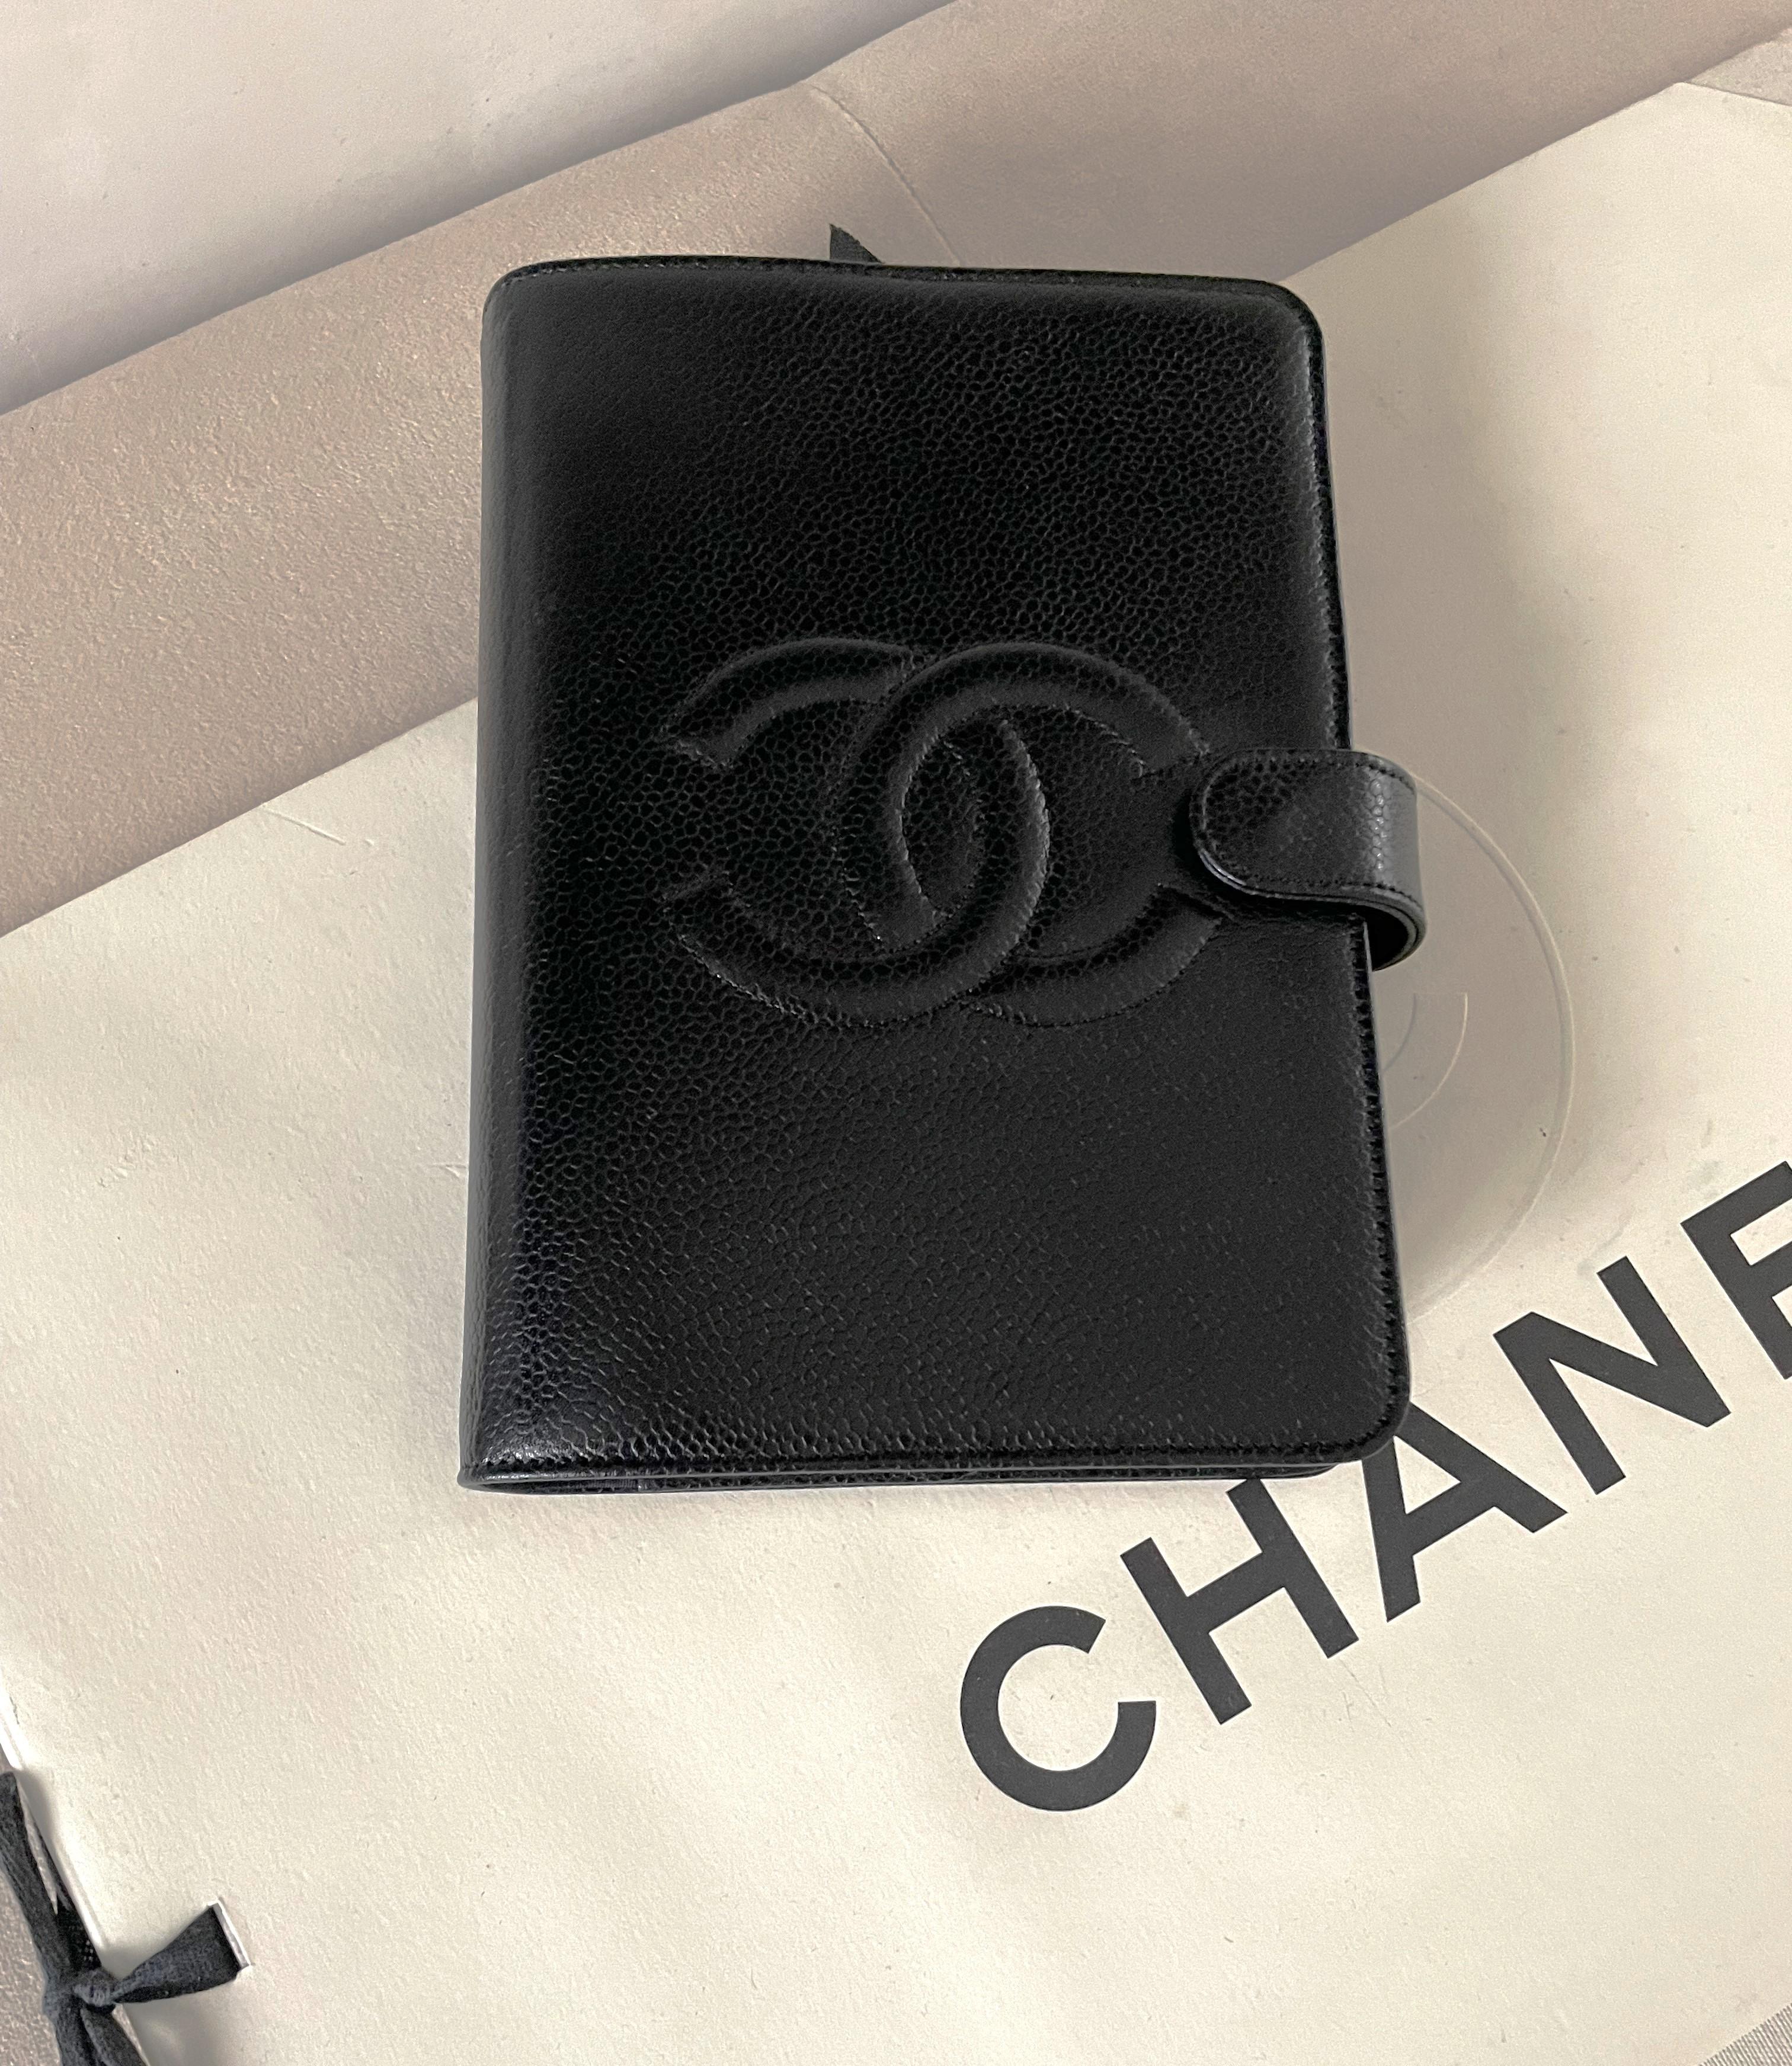 Shine everyday with this beautiful vintage Chanel Black Caviar Leather Agenda Cover Filofax; you can update with a Filofax new filling 2024.  It is never used and in excellent new condition.

Such a luxurious and stylish accessory for organizing